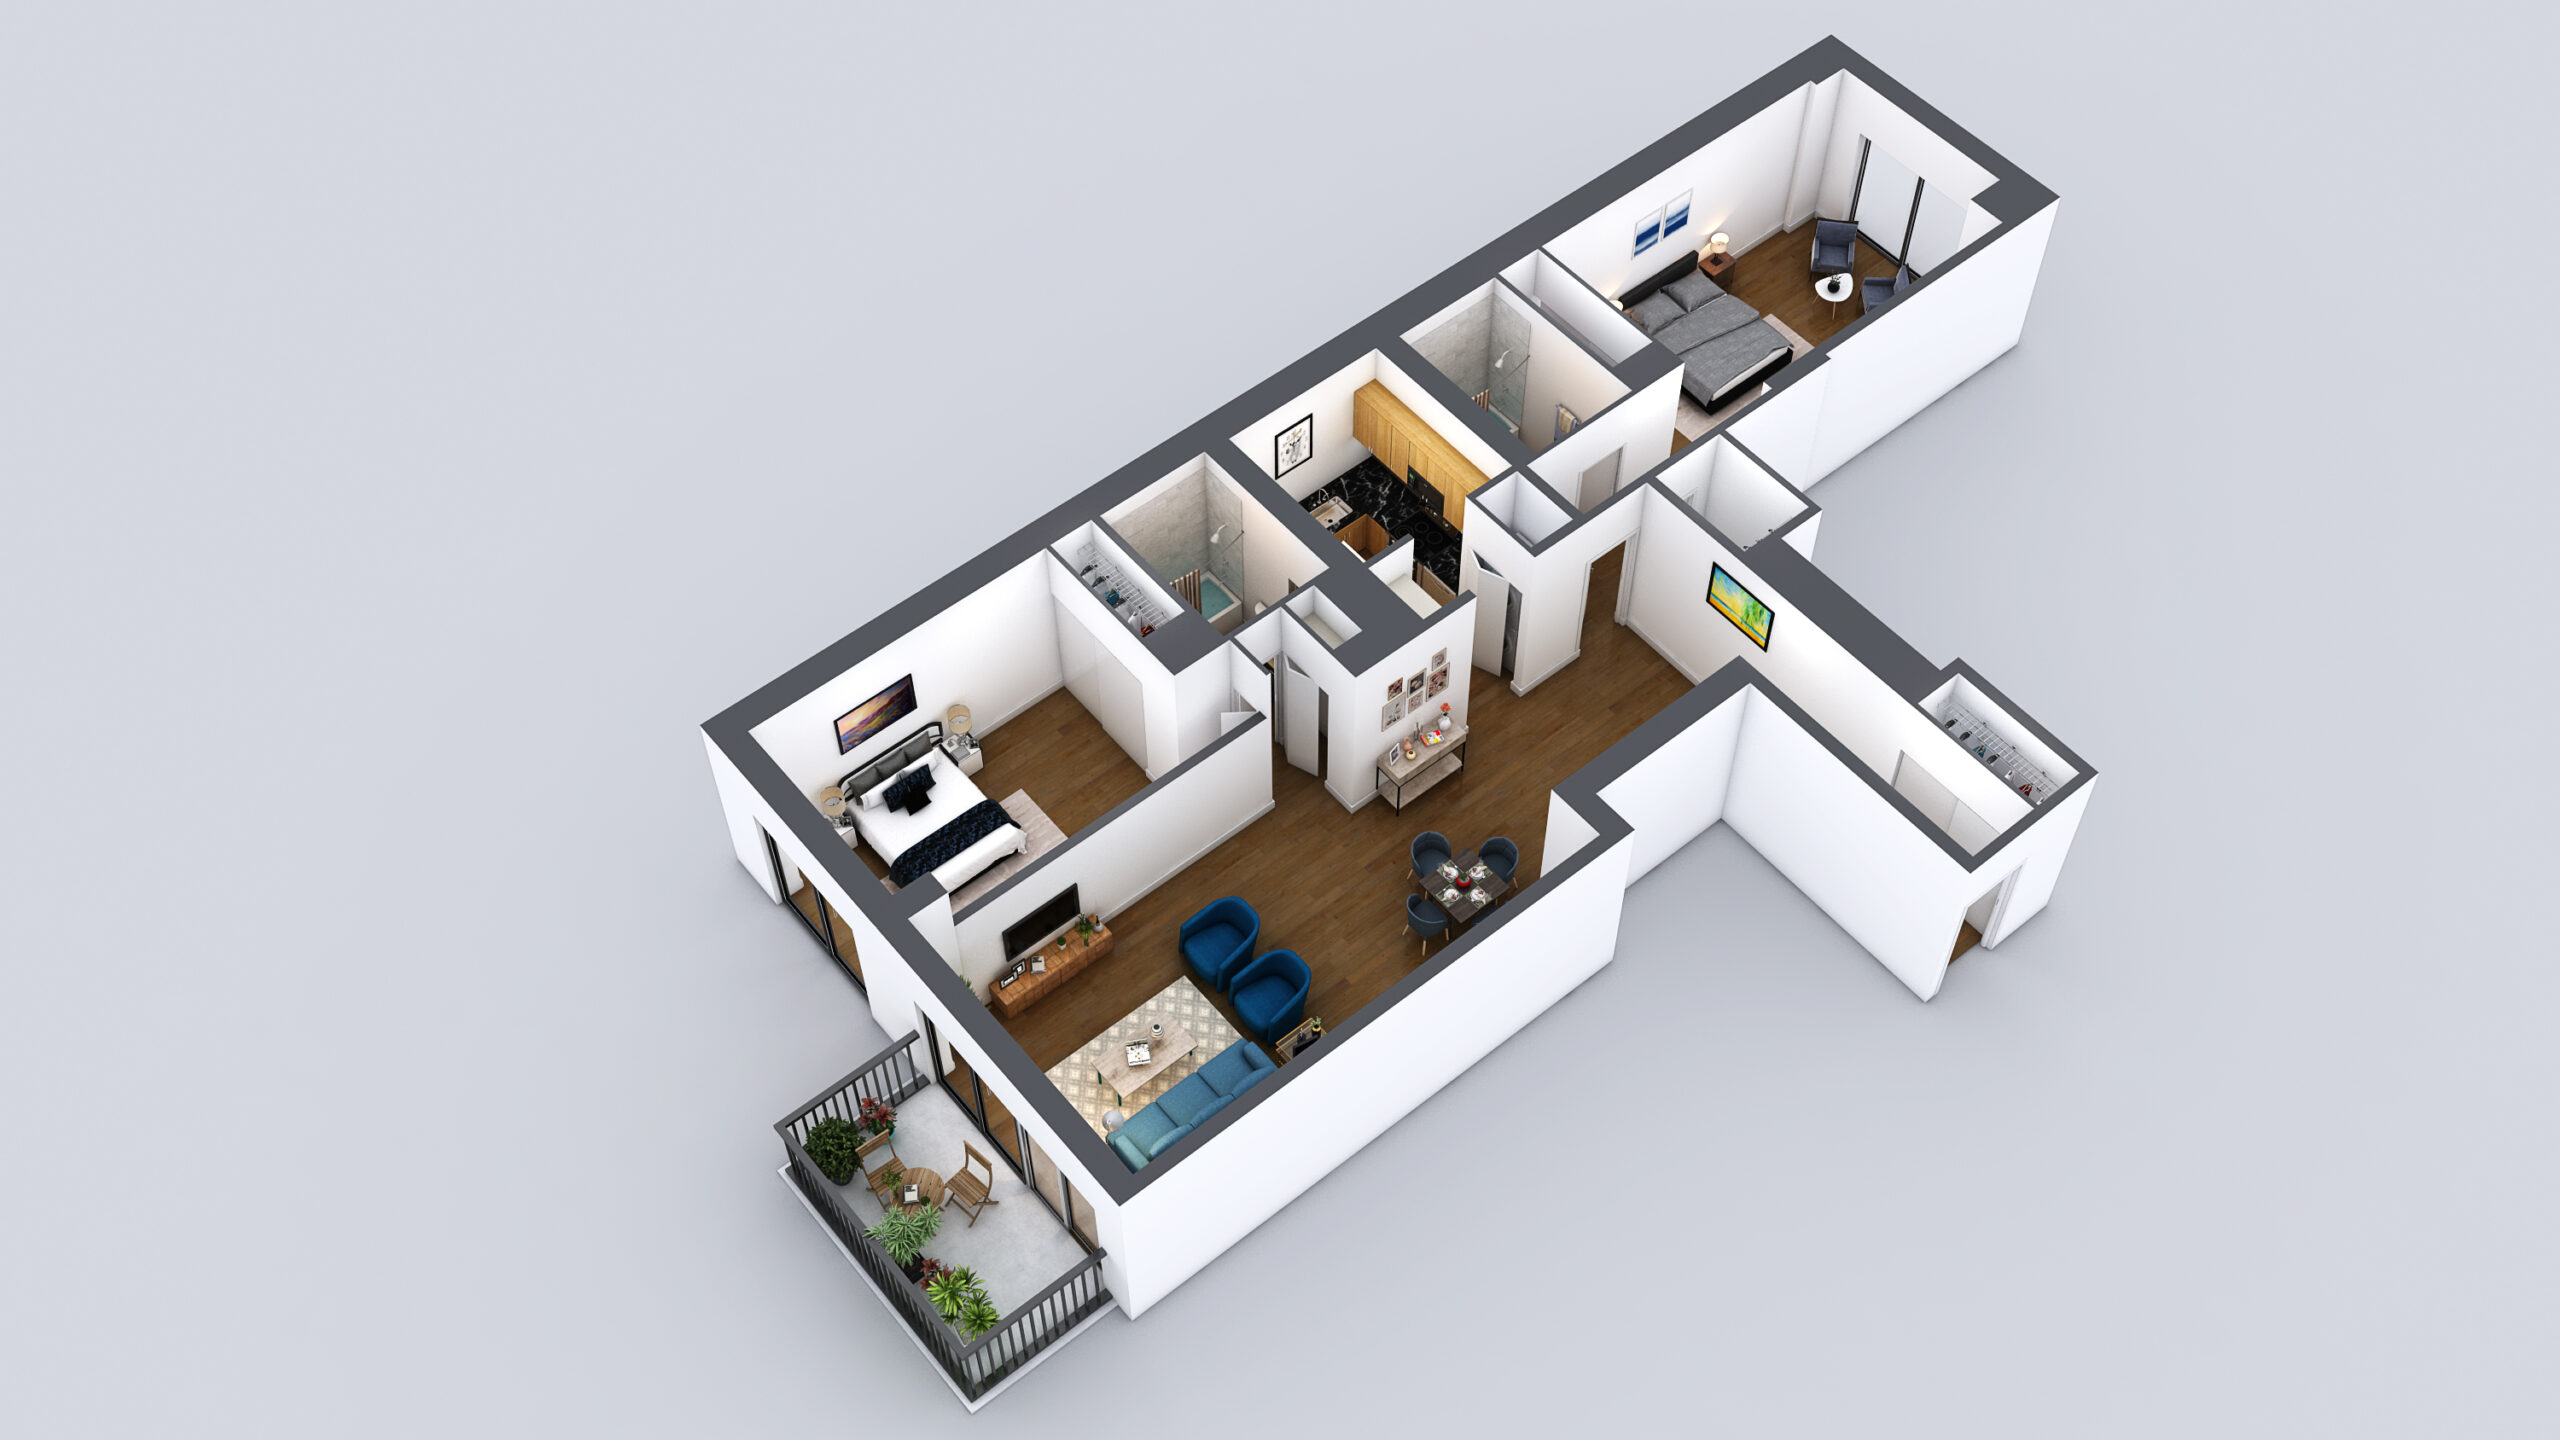 Amazing 3d floor plan of Small House by Yantram architectural rendering studio-Los Angeles, California